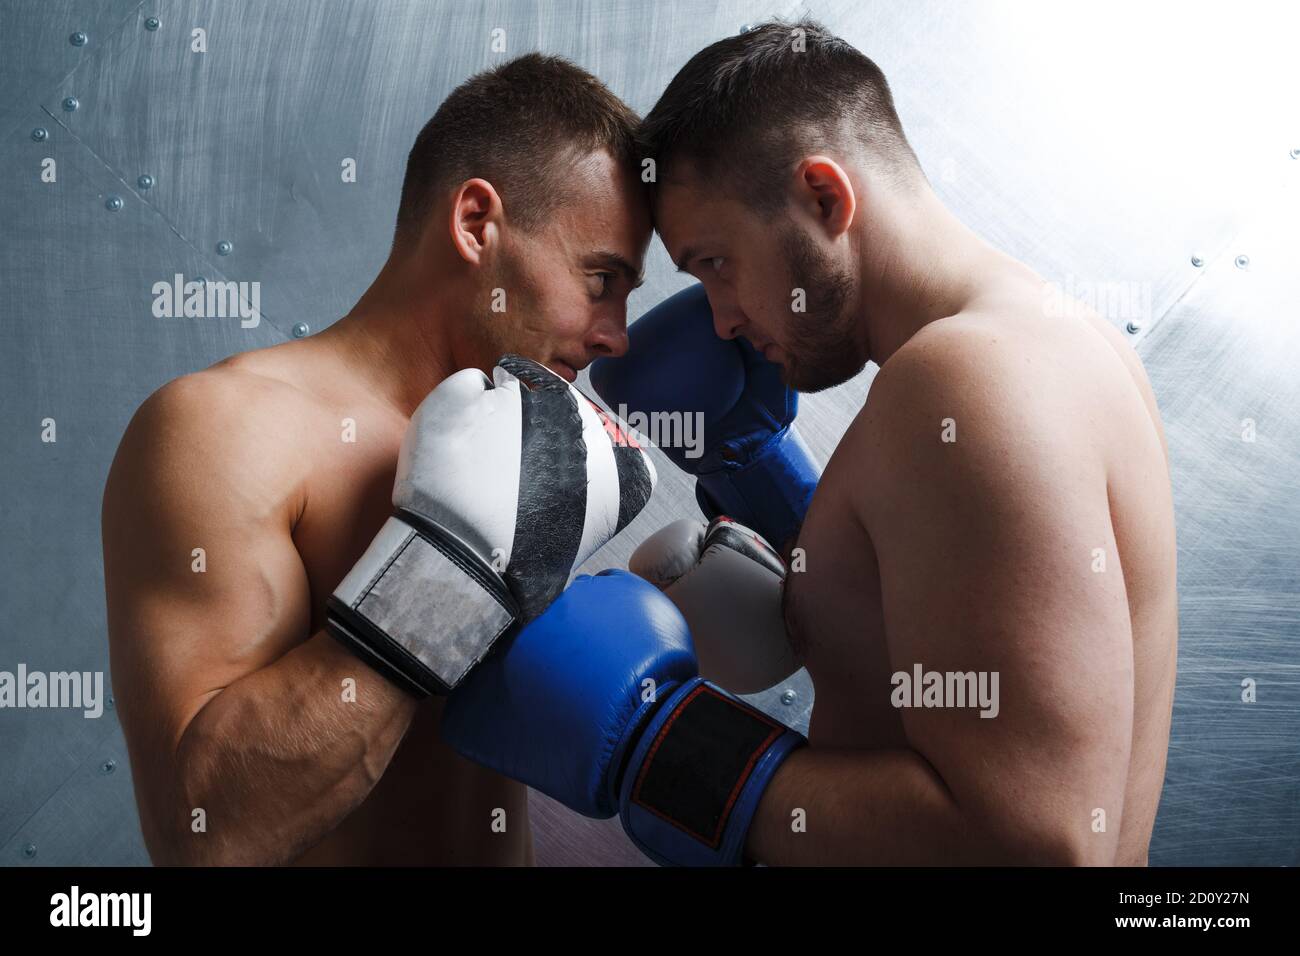 Two men boxers fighting muay thai boxing. Face to face posing. Stock Photo